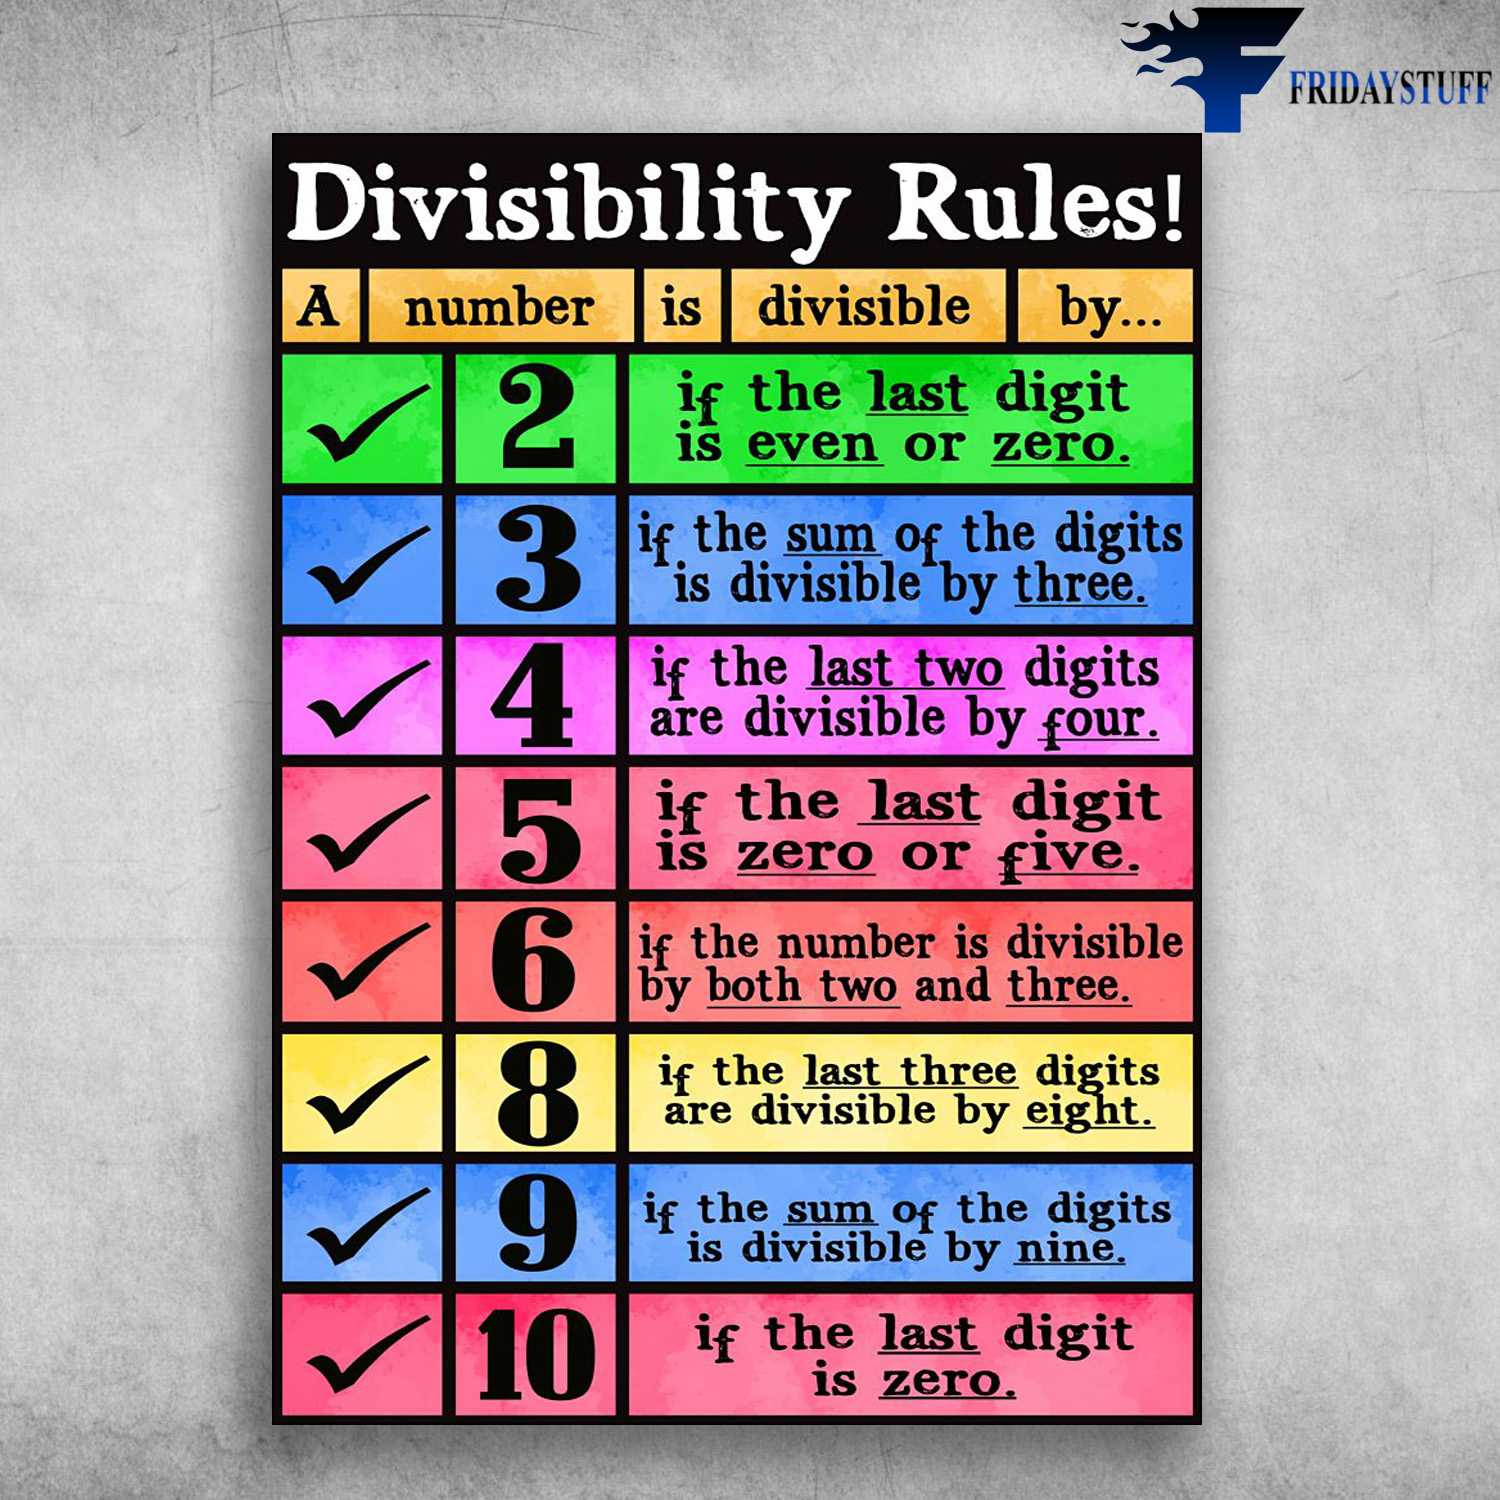 Divisibility Rules - A Number Is Divisible By, If The Last Digit Is Even Or Zero, If The Sum Of The Digits Is Divisible By Three, Back To School, If The Last Digit Is Zero